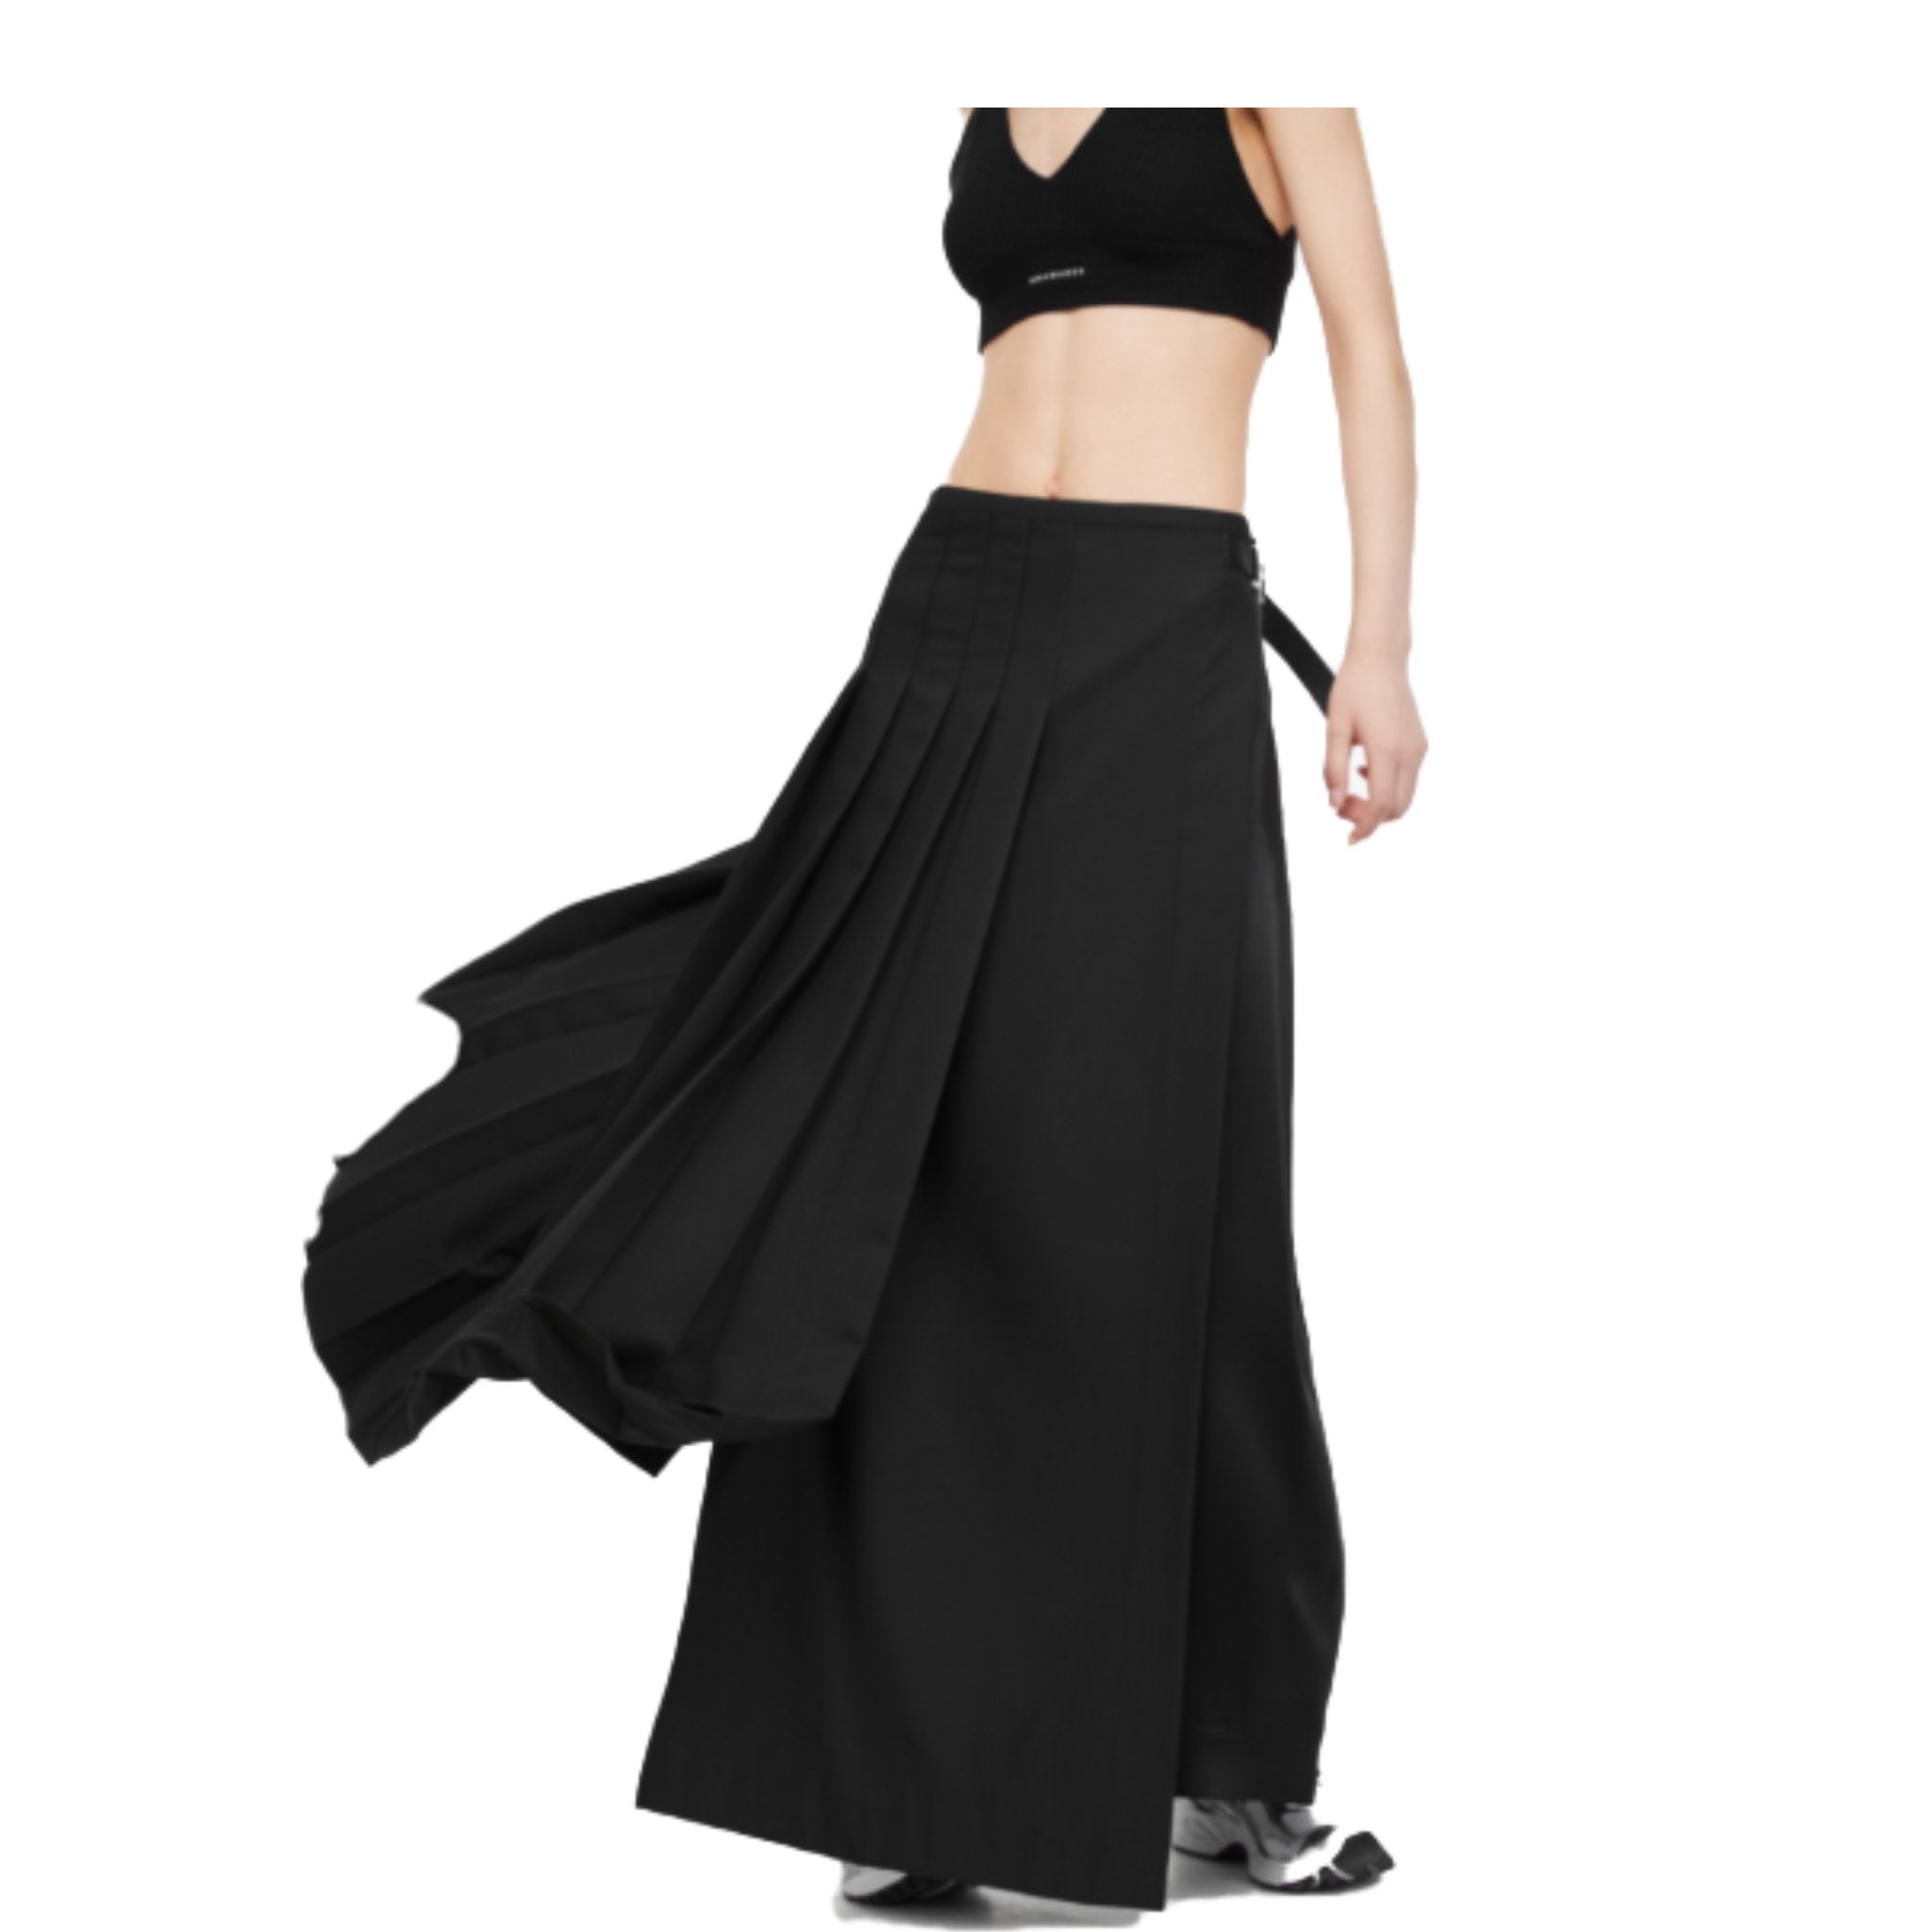 UNAWARES Black Mixed Fabric Patchwork Pleated Irregular Design Mid-Length Skirt | MADA IN CHINA